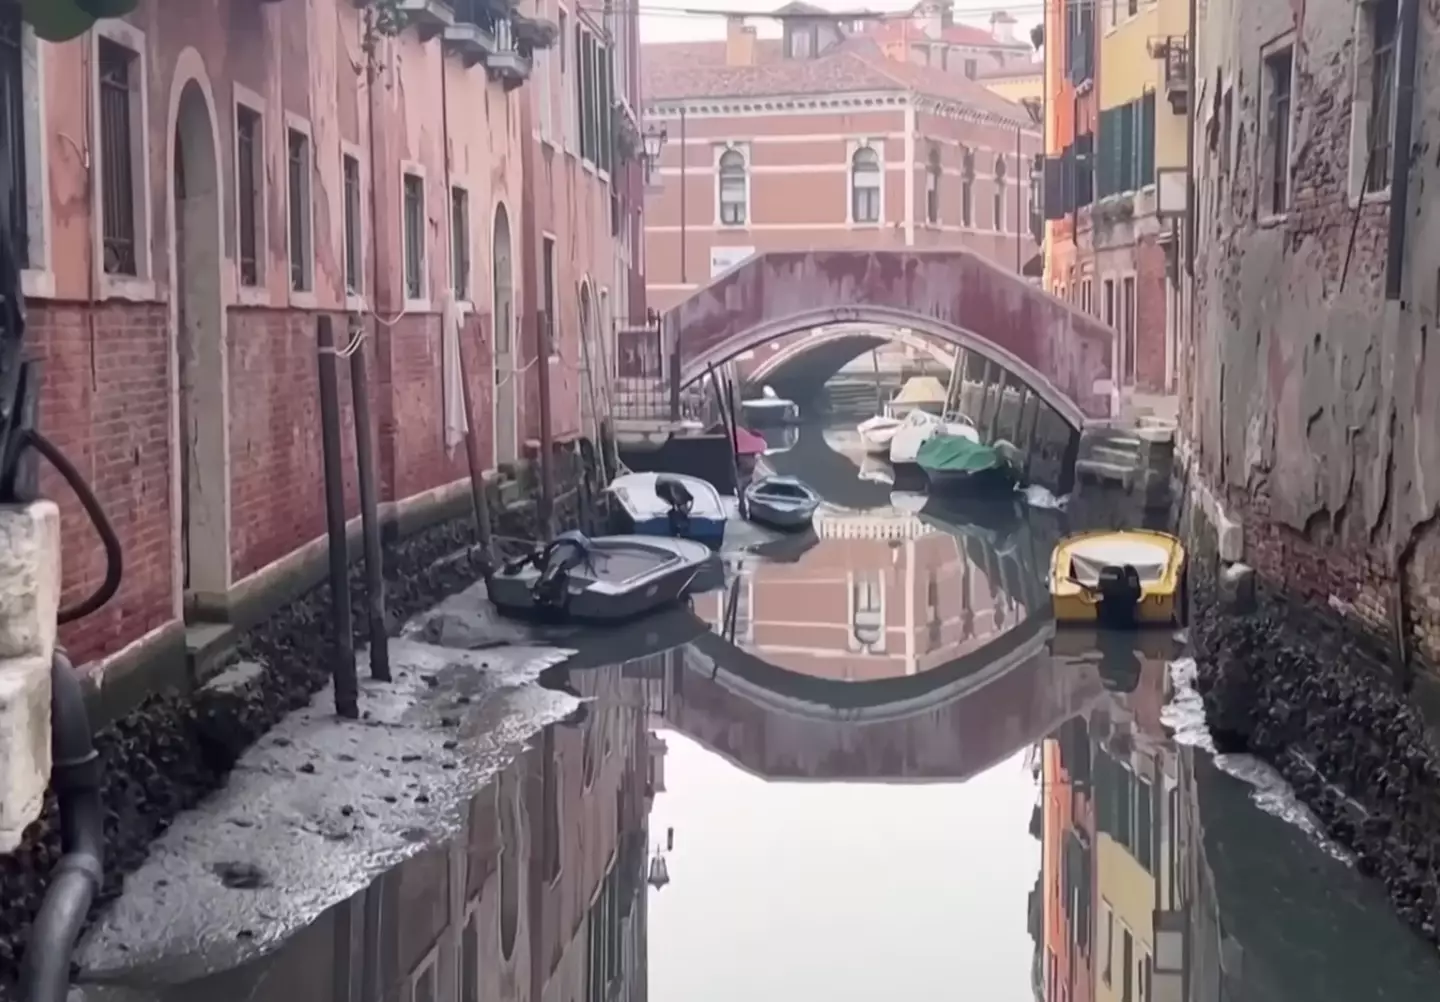 The iconic canals are currently incredibly low.